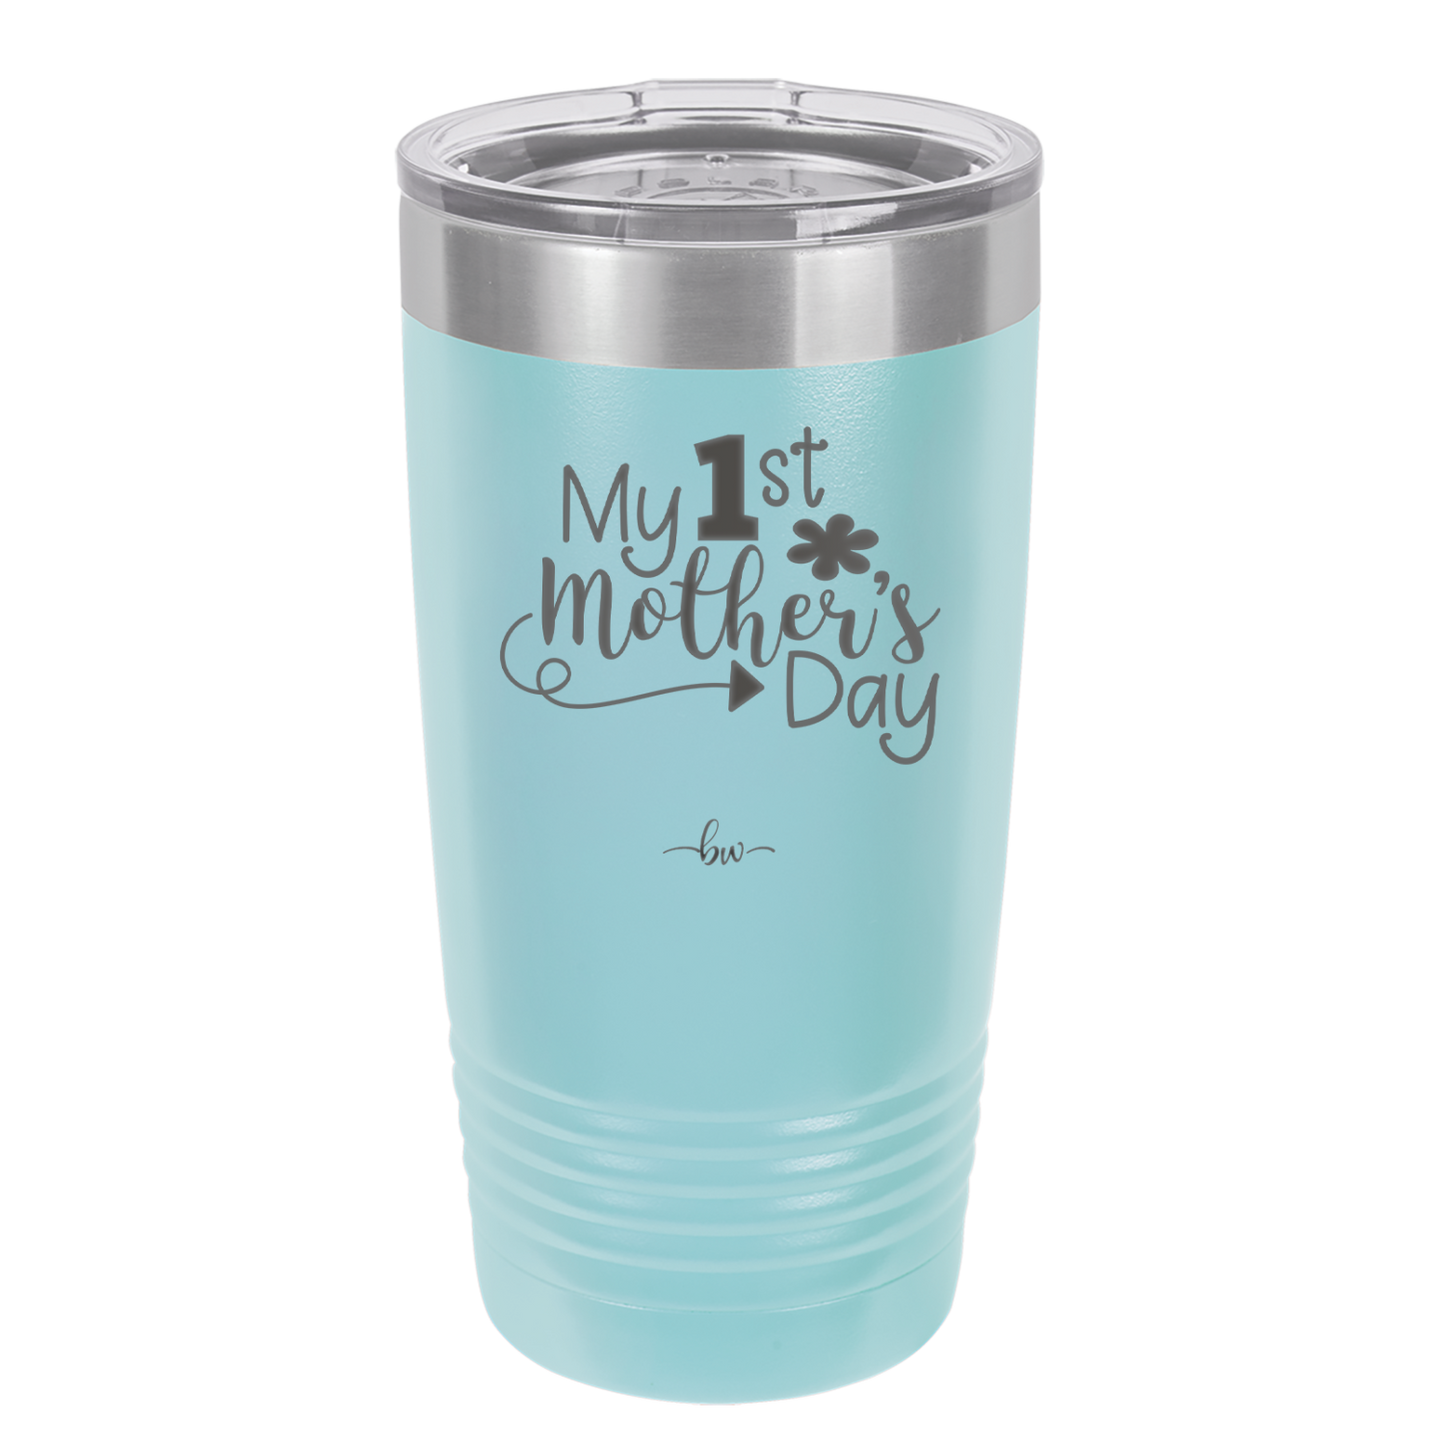 My 1st Mother's Day - Laser Engraved Stainless Steel Drinkware - 2001 -